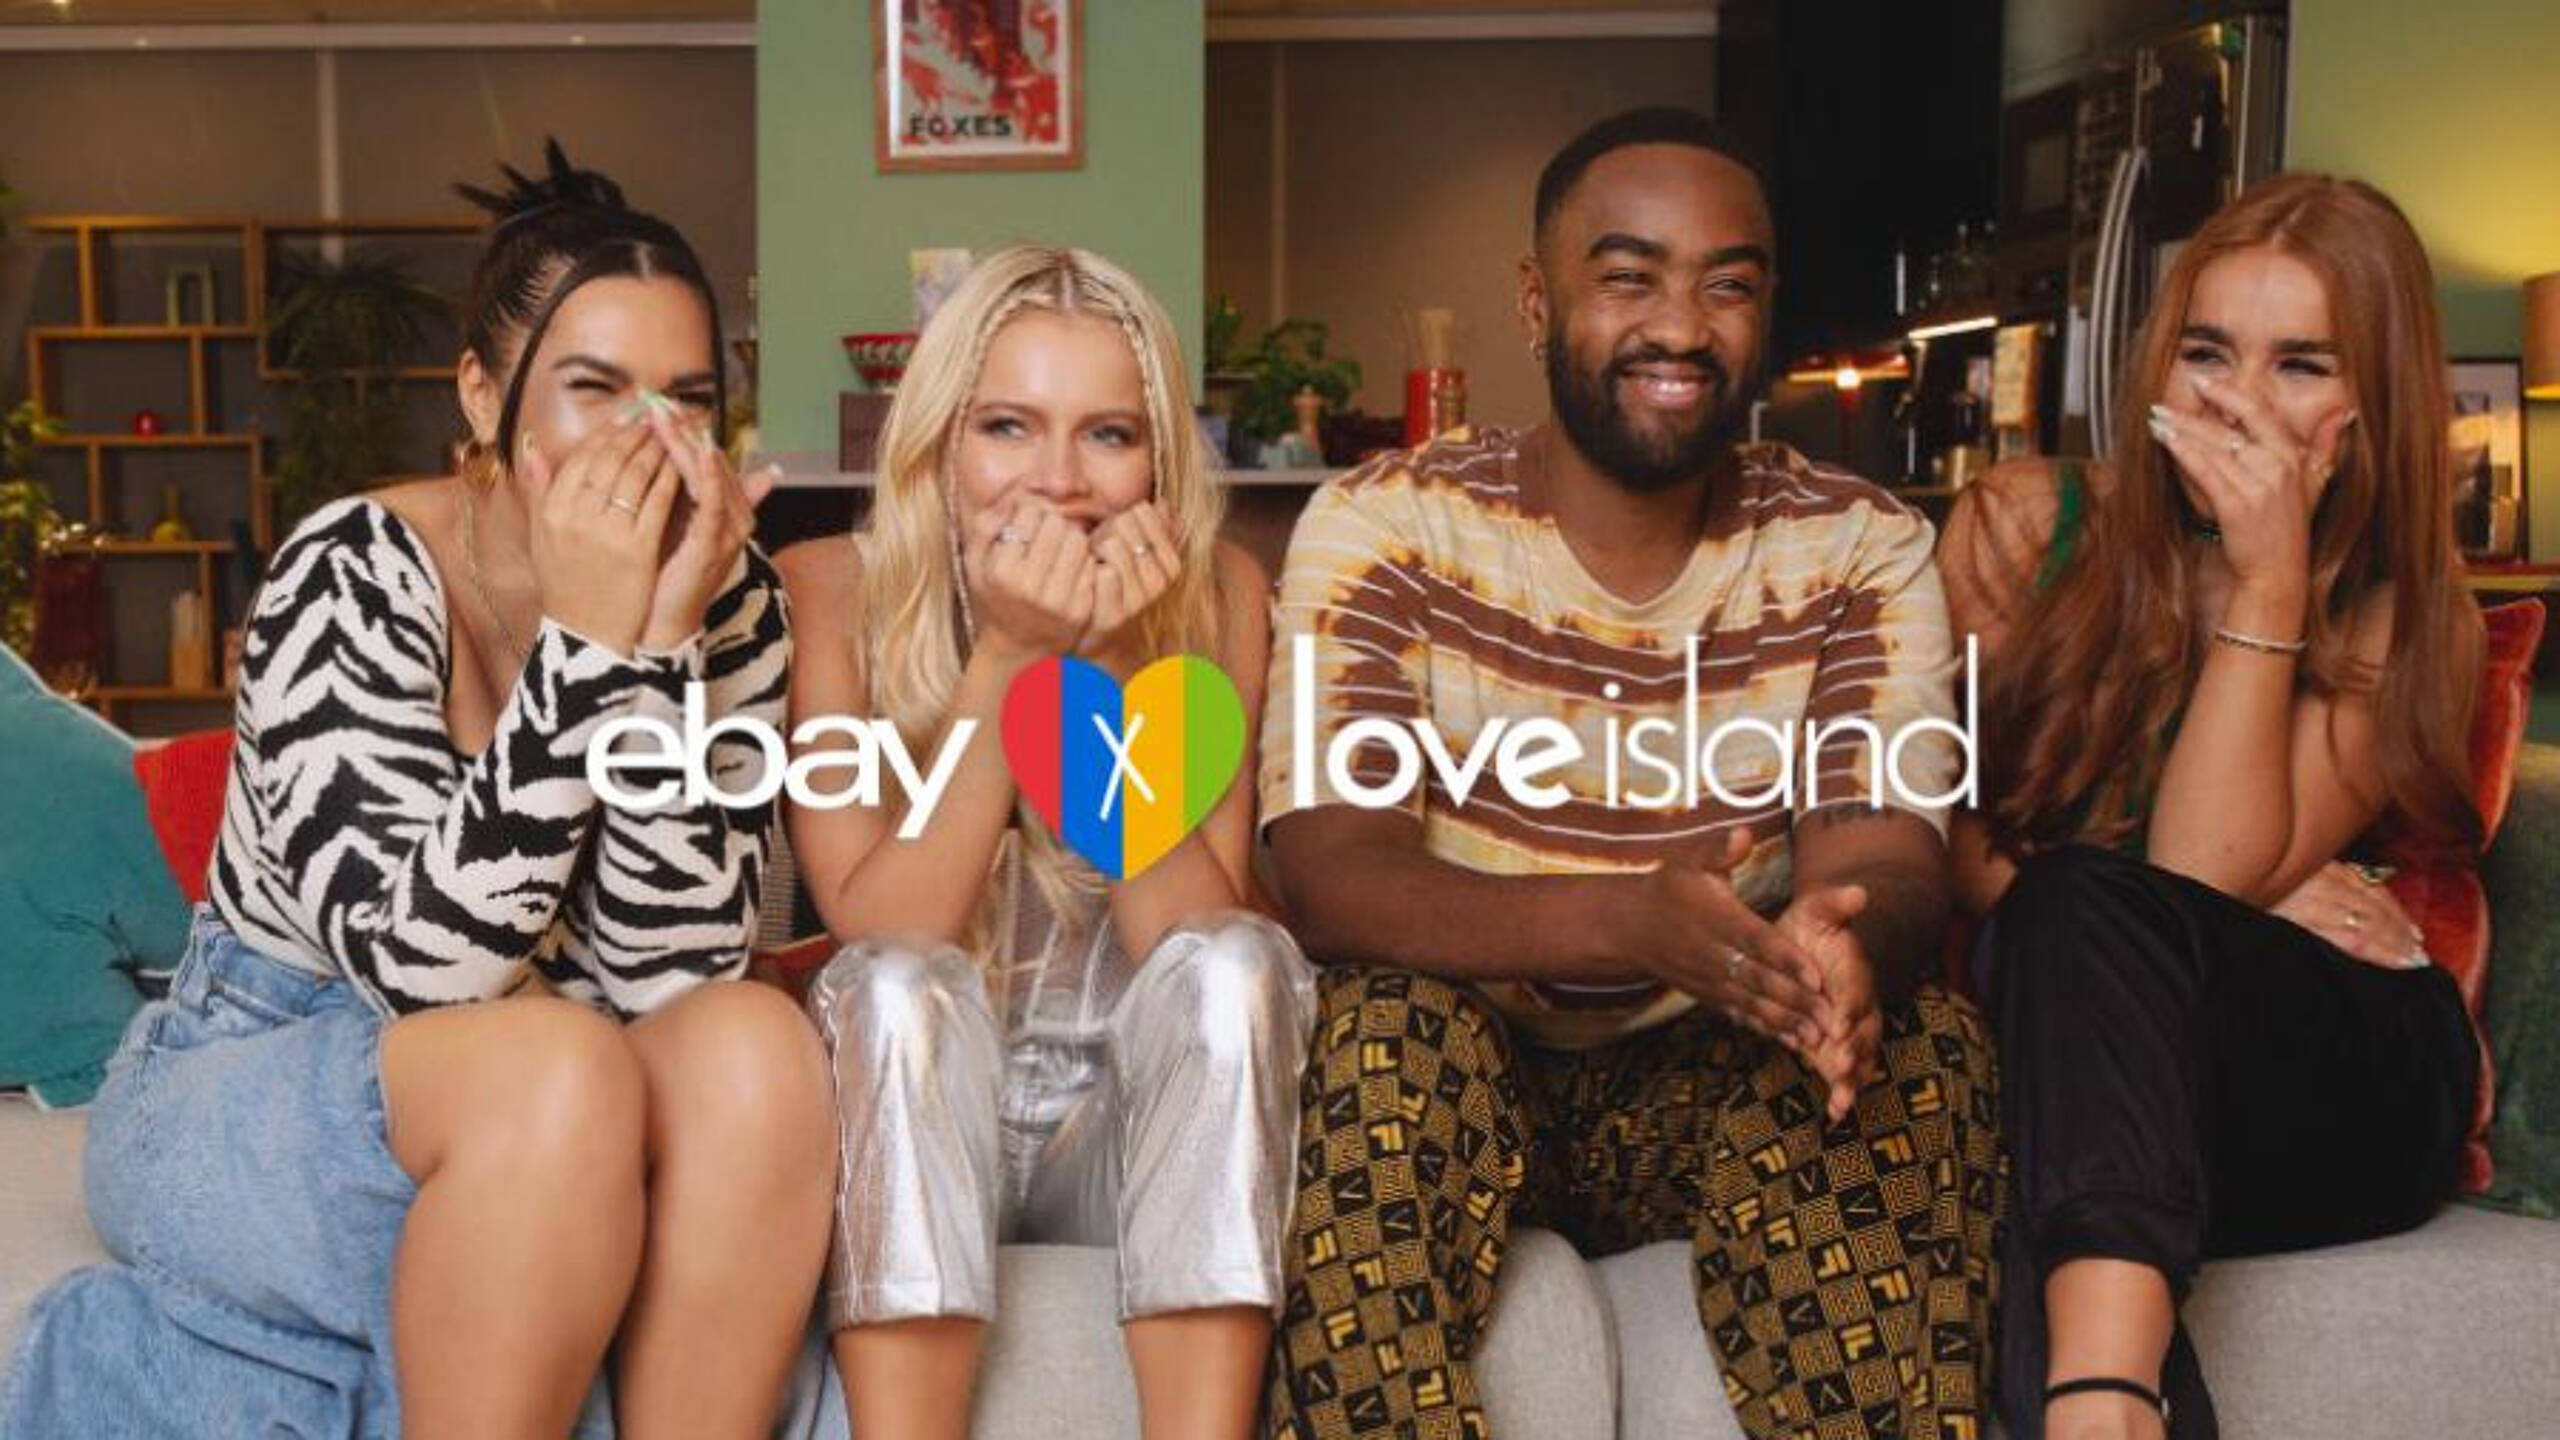 ITV selects eBay as Love Island’s fashion partner for second year running